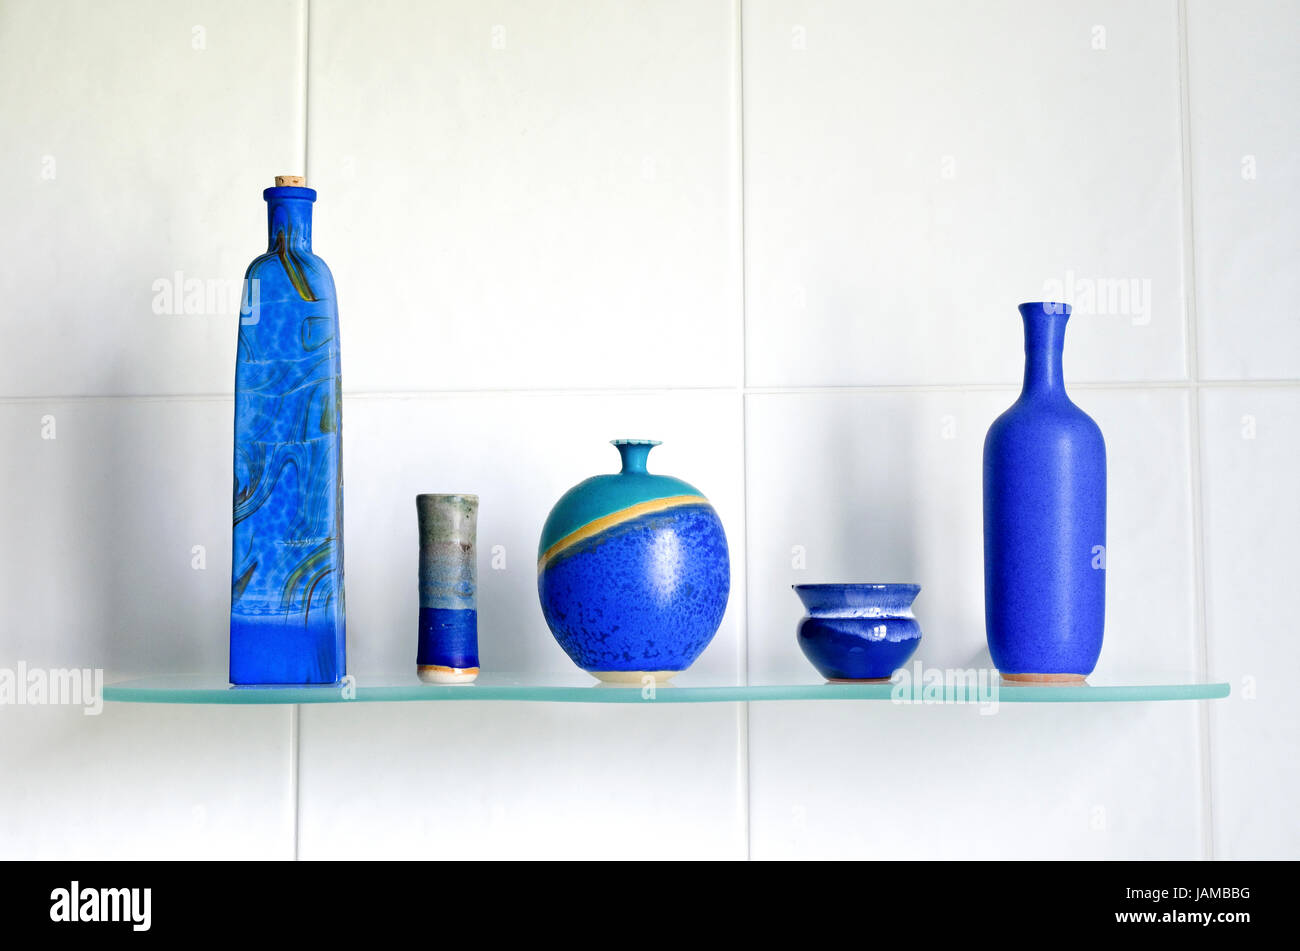 Still life arrangement of beautiful hand made artisan blue artisan pottery on a glass shelf, with a white tiled background. Stock Photo